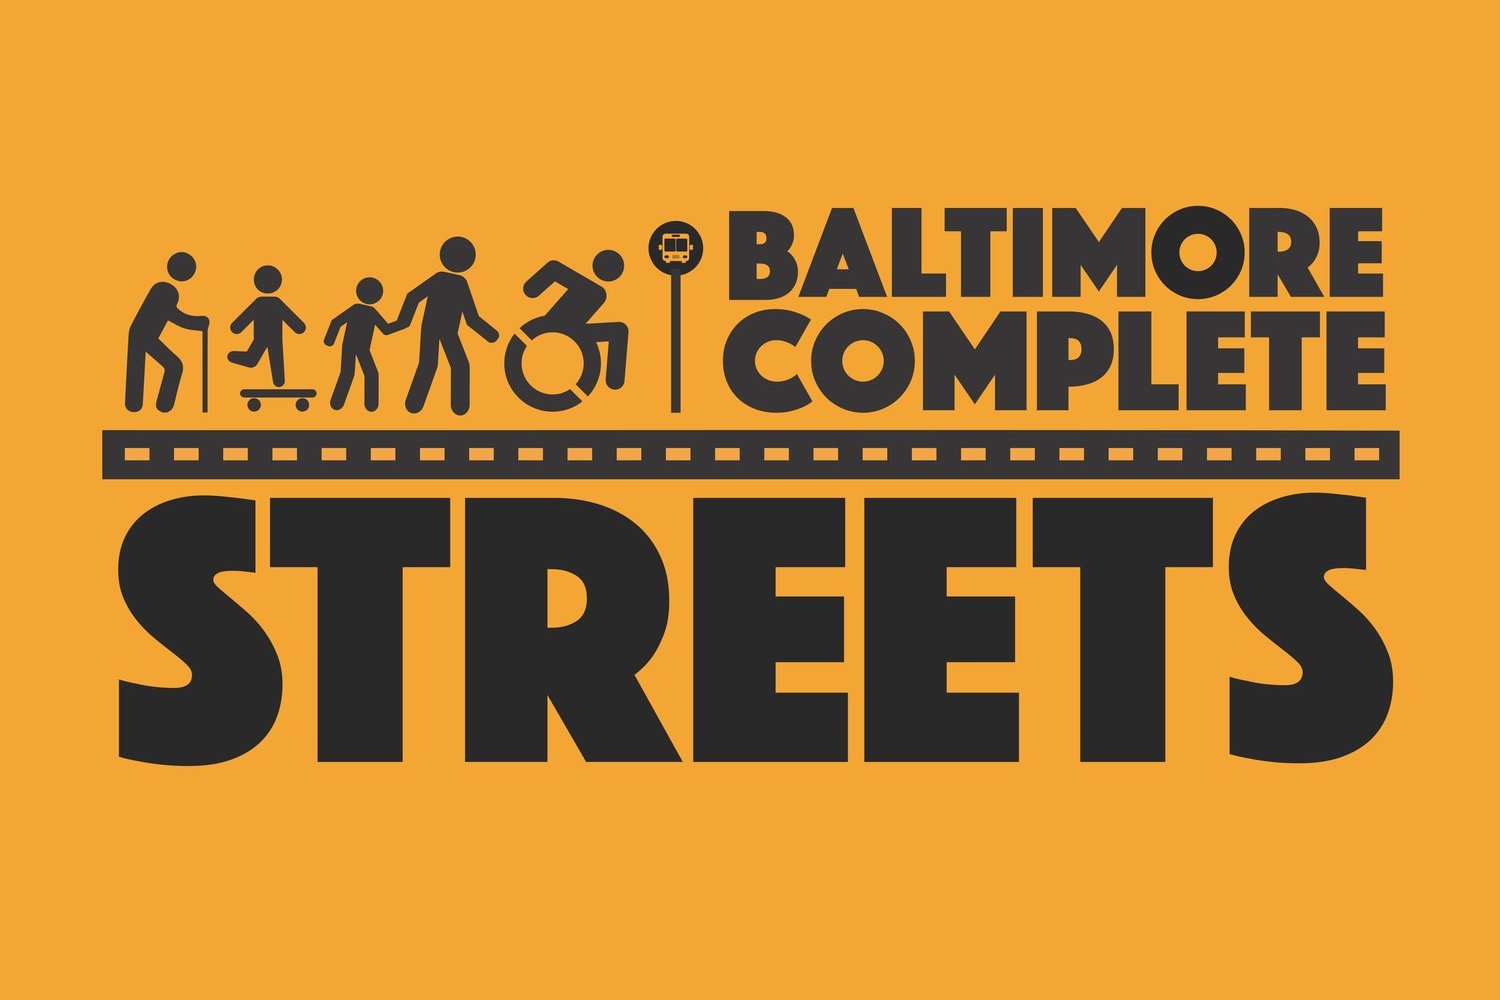 Baltimore Complete Streets trimmed